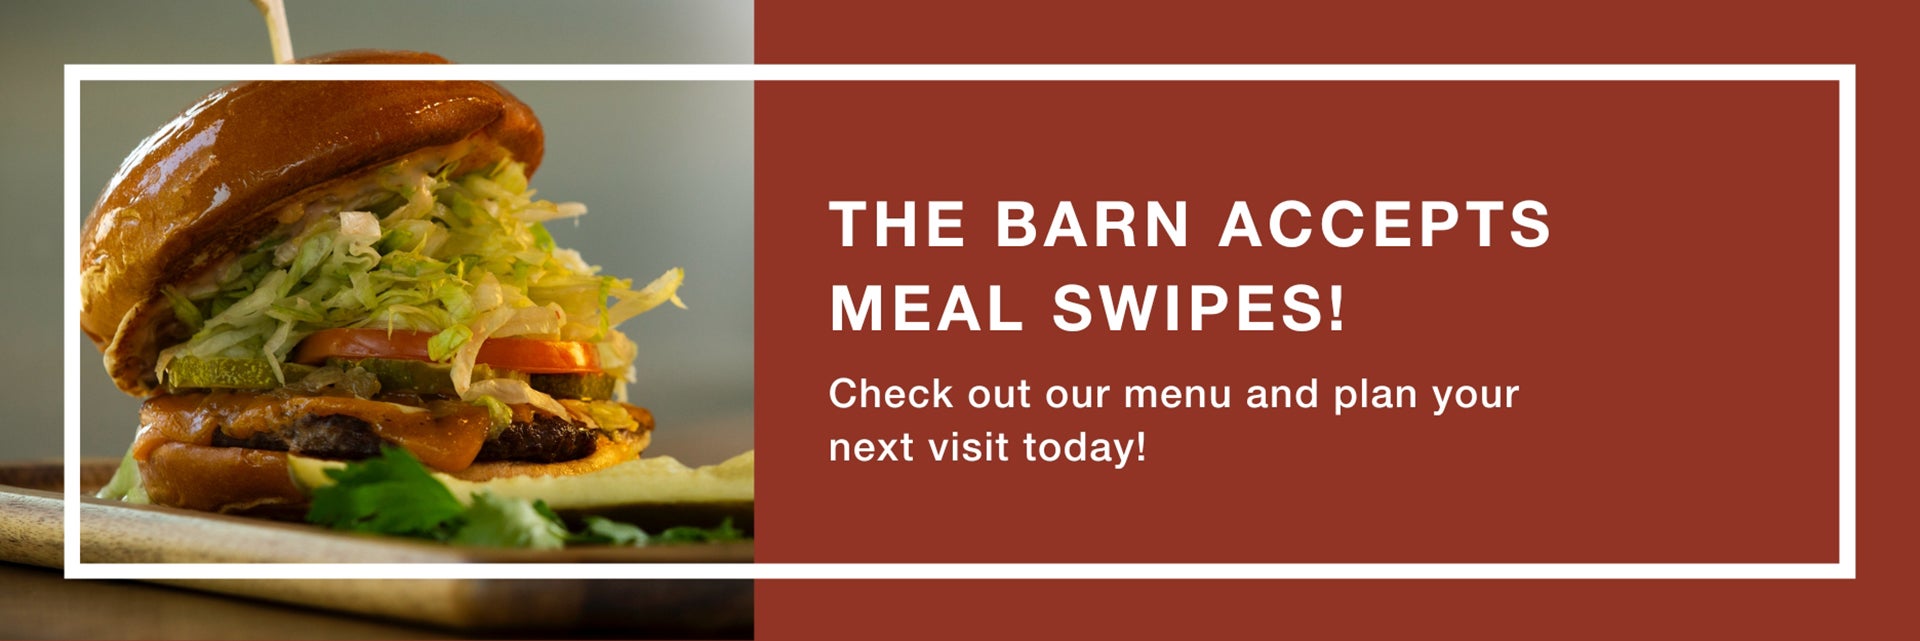 The Barn Accepts Meal Swipes